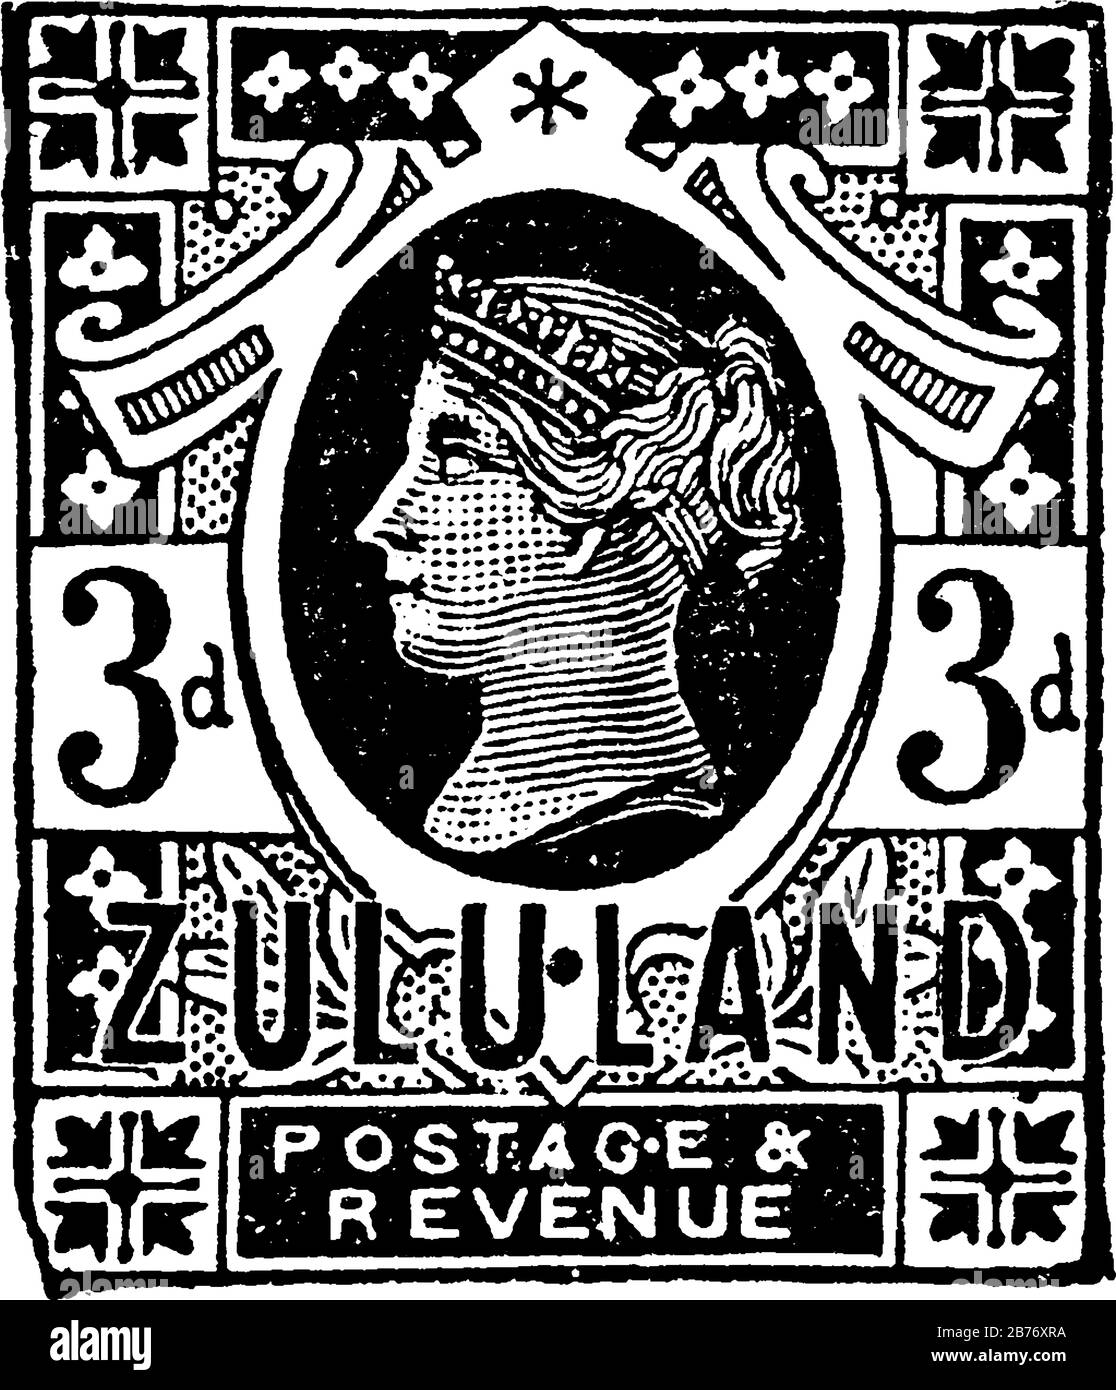 Zululand Stamp (3 d) from 1888, a small adhesive piece of paper stuck to something to show an amount of money paid, mainly a postage stamp, vintage li Stock Vector